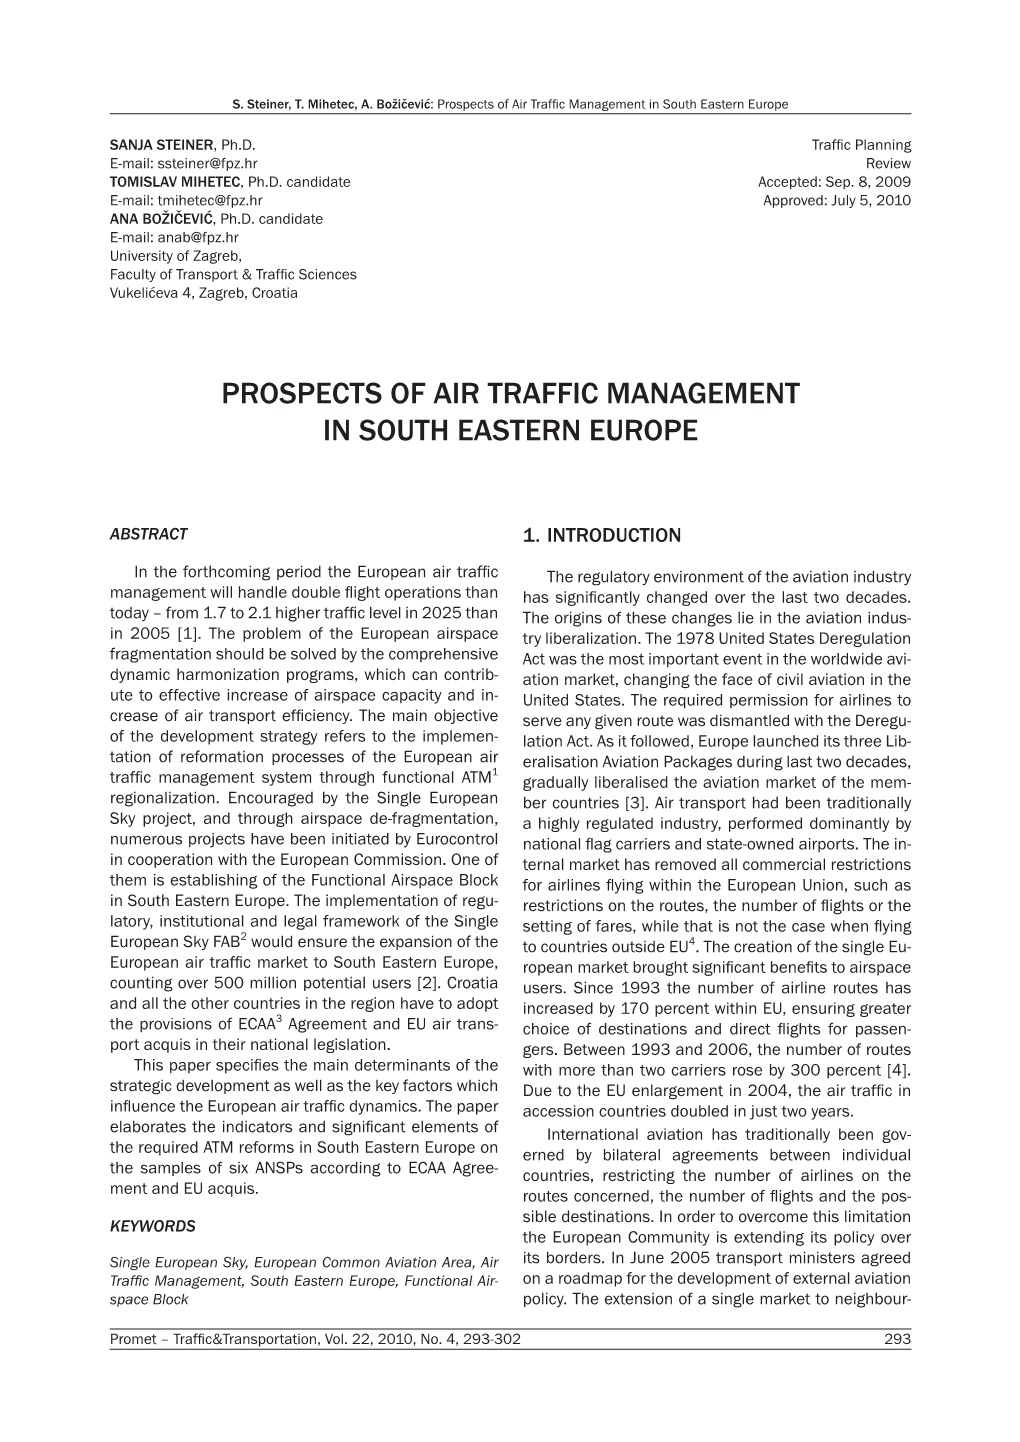 Prospects of Air Traffic Management in South Eastern Europe